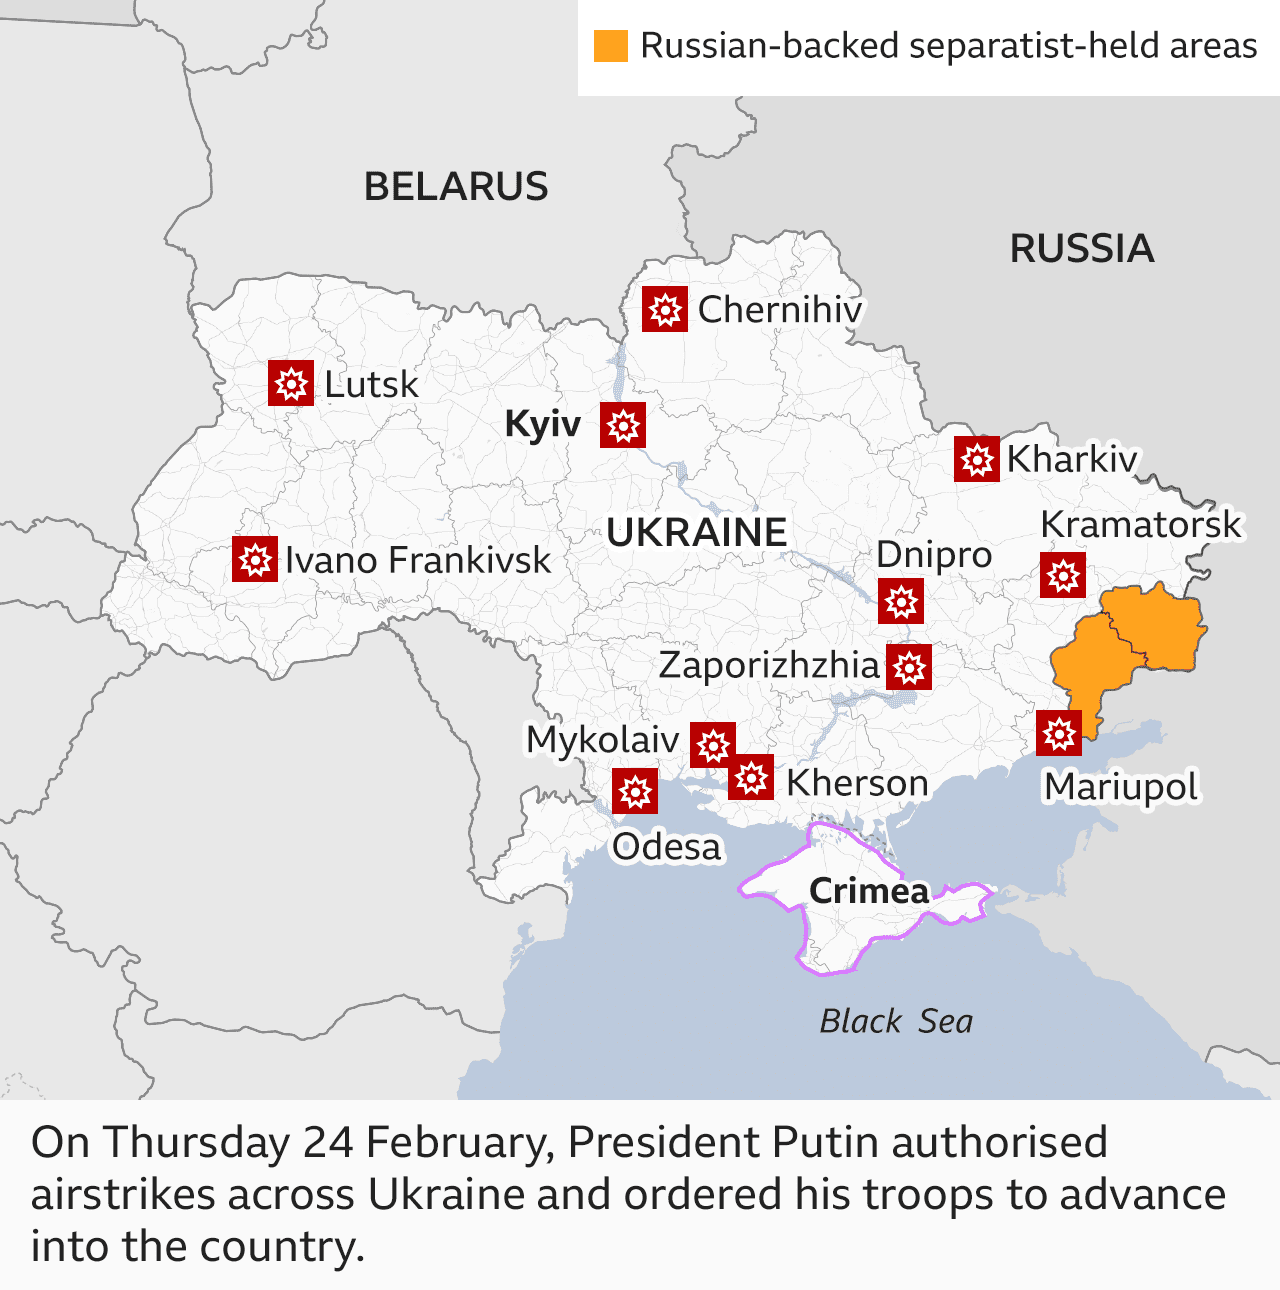 On Thursday 24 February, President Putin authorised airstrikes across Ukraine and ordered his troops to advance into the country.